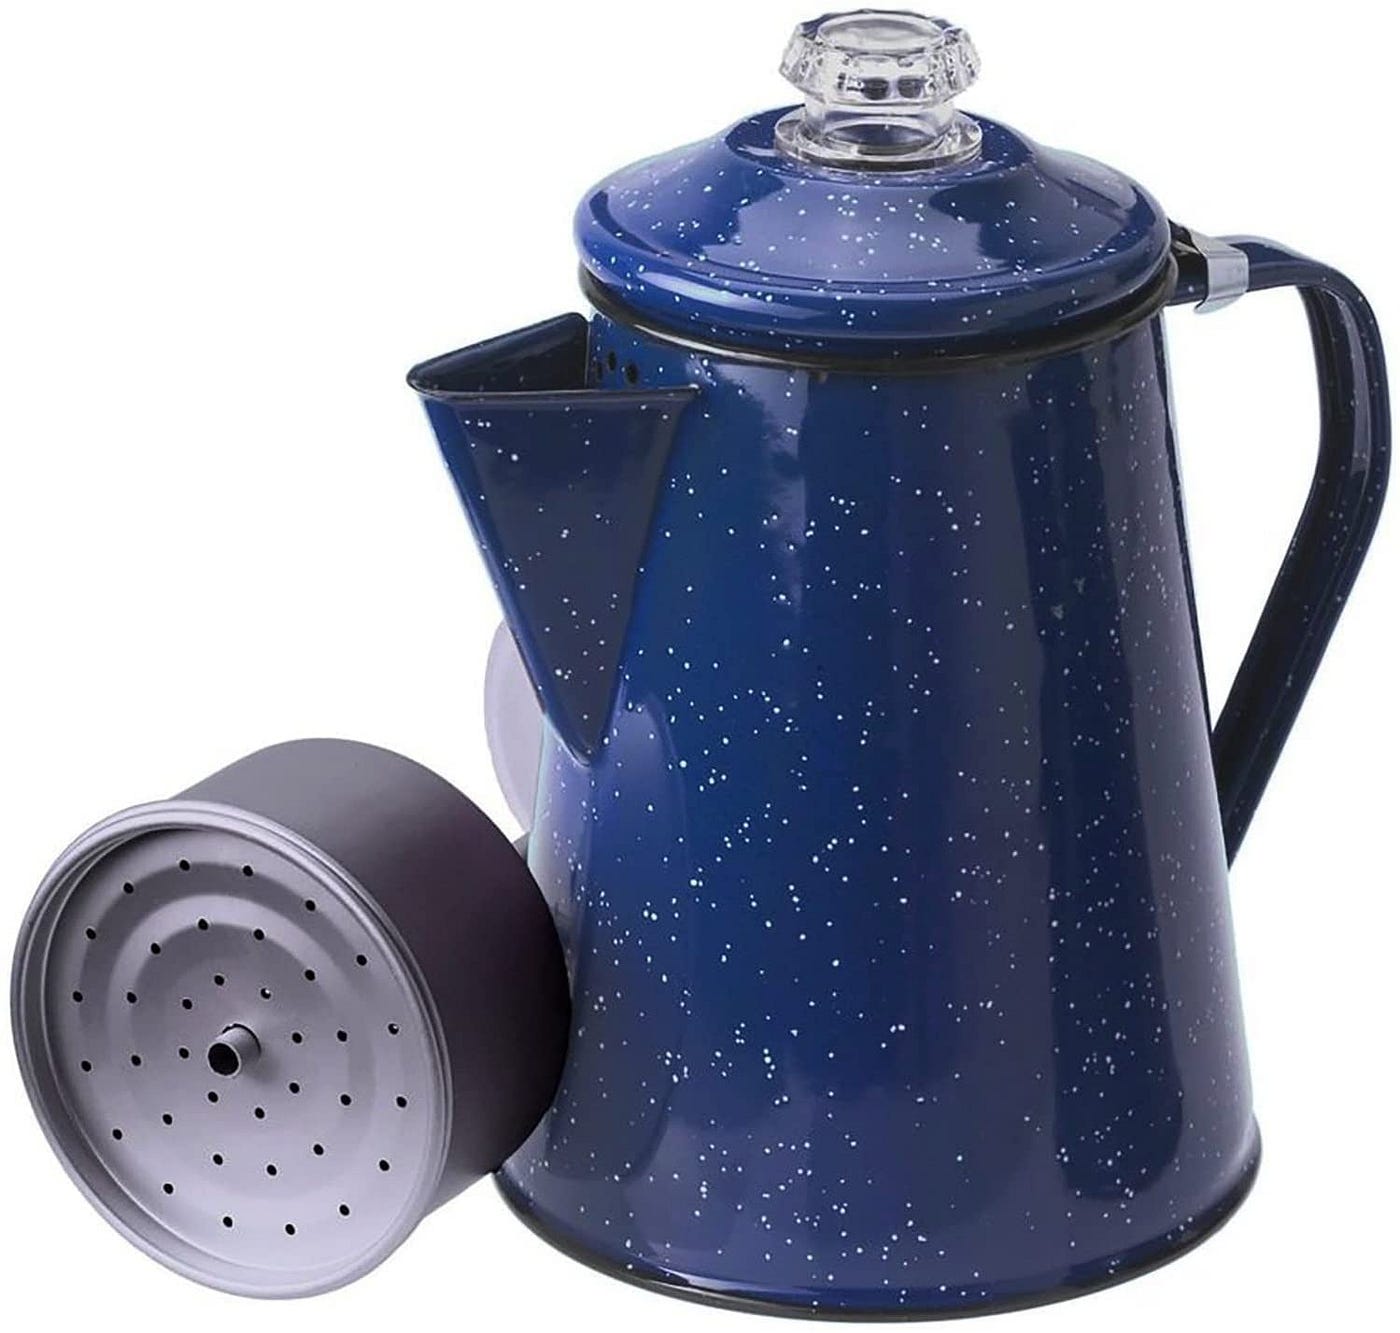 How to Use a Percolator